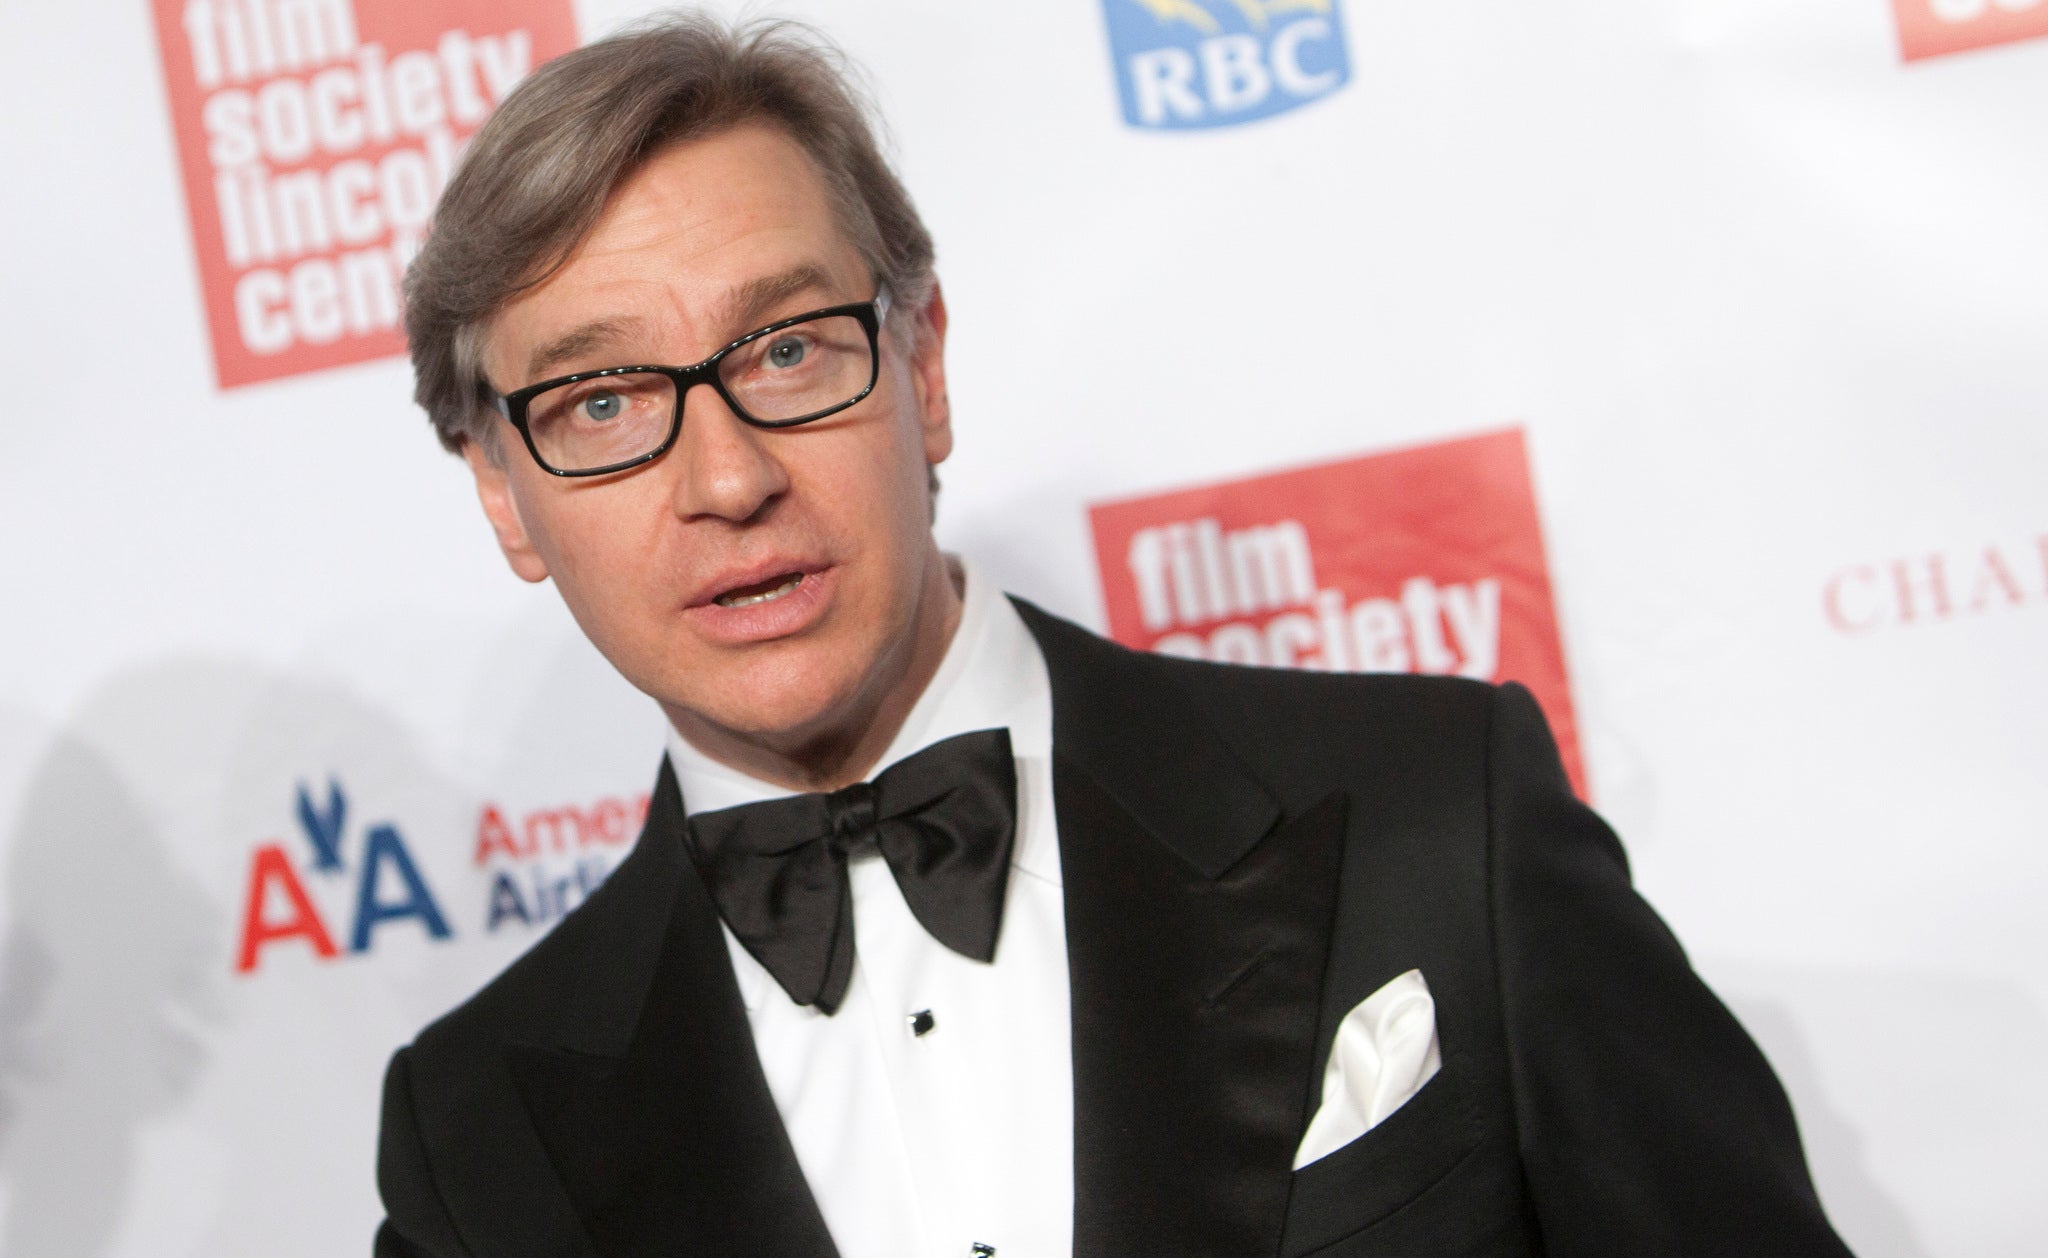 Paul Feig is reportedly considering directing the new Ghostbusters film